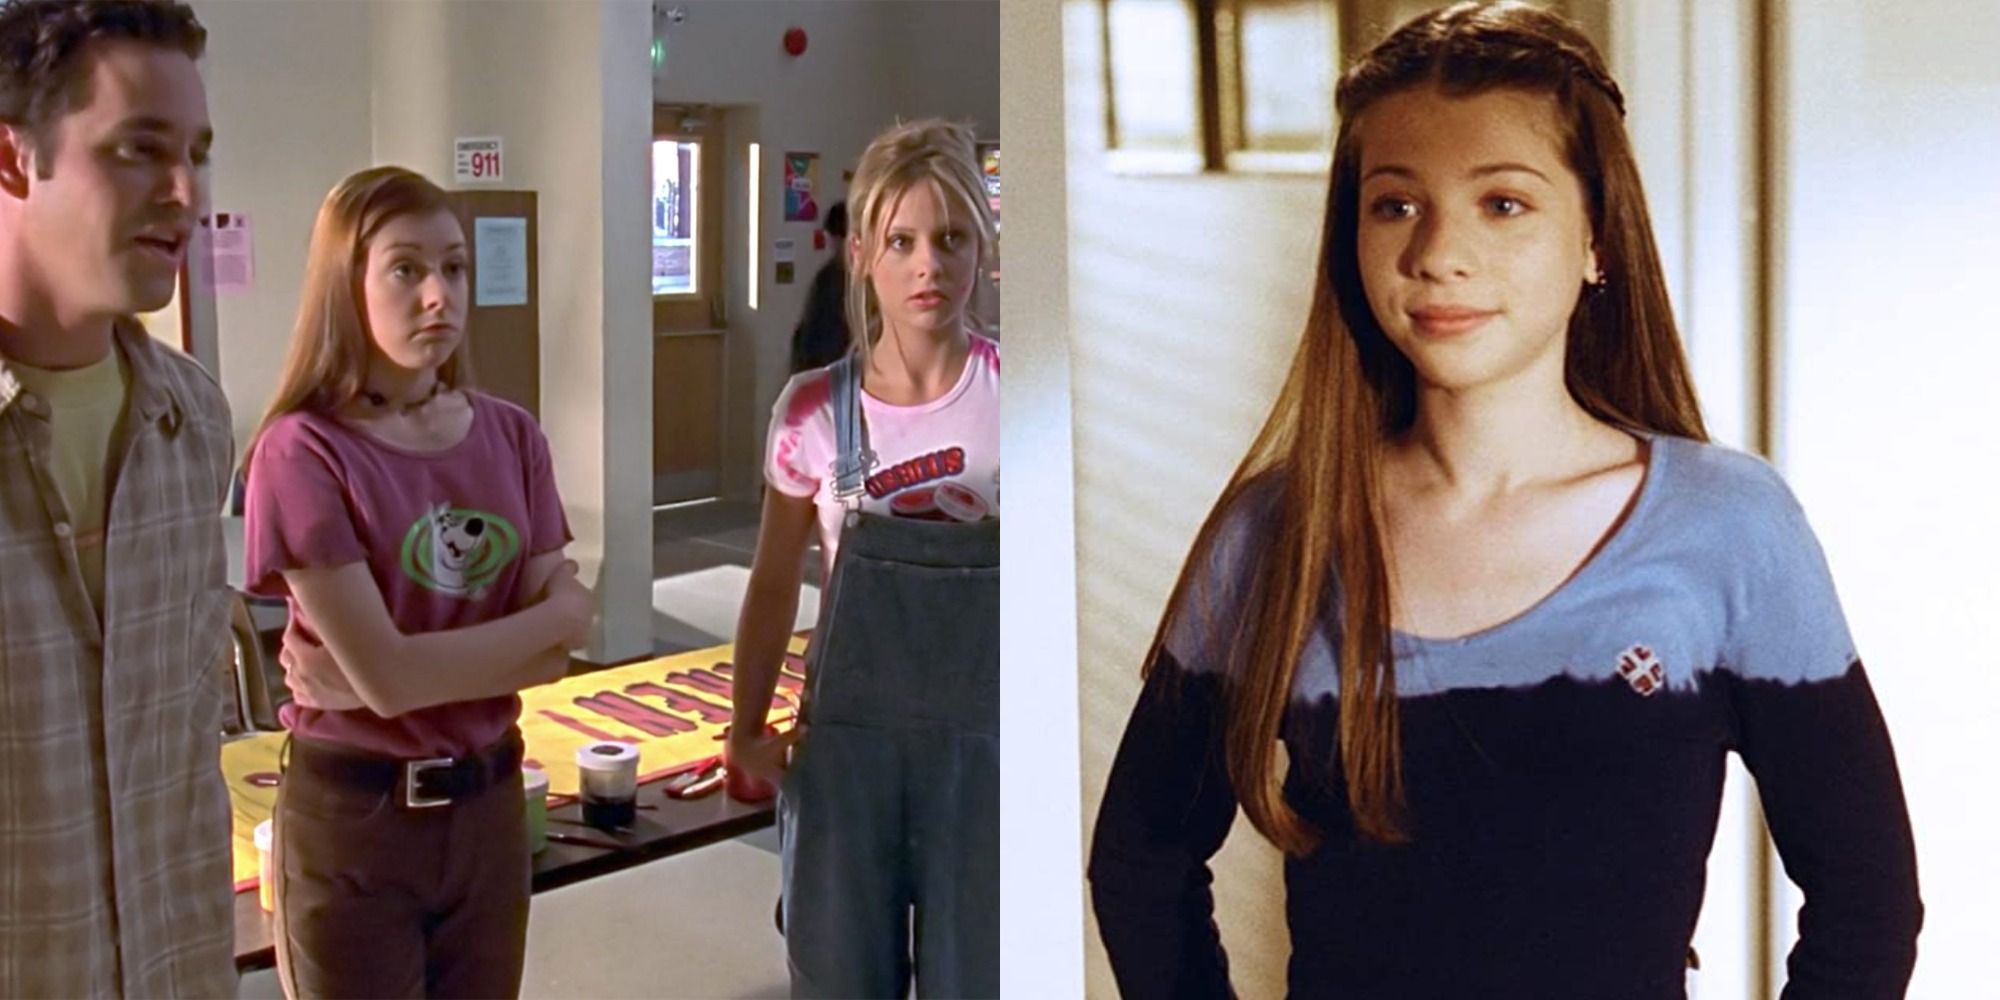 Split image showing Xander, Willow, and Buffy at school, and Dawn smiling in Buffy the Vampire Slayer